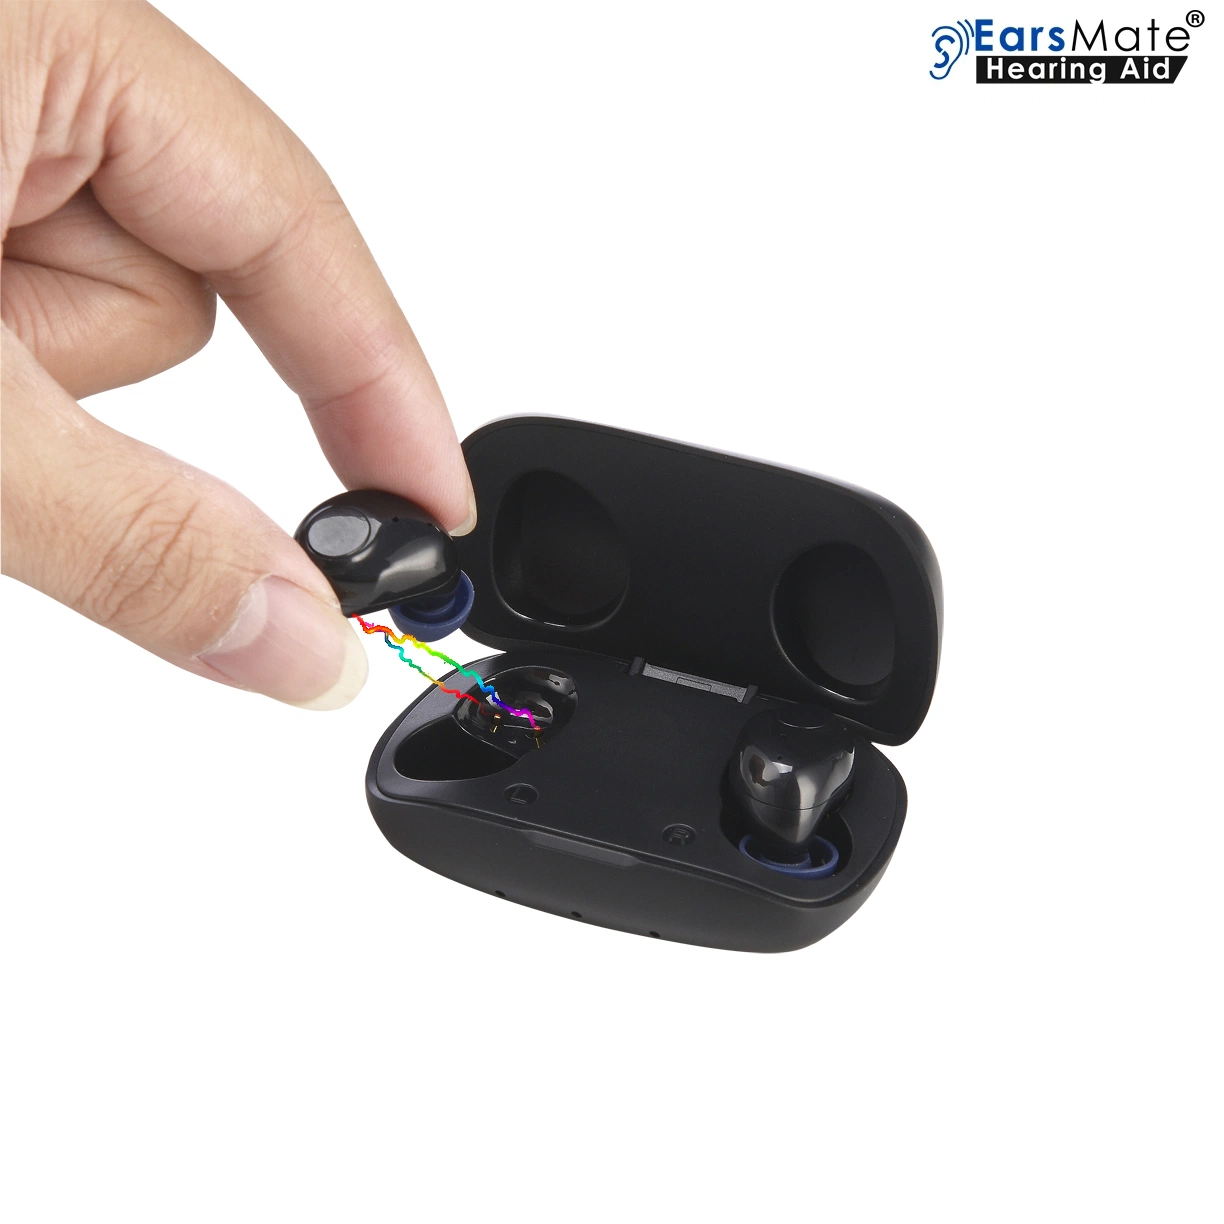 New Wholesale/Supplier 2PCS Rechargeable Mini Ear Hearing Aid Pocket Non Programmable Analog Voice Hearing Sound Amplifier Aids Product Medical Earsmate G18 Bluetooth